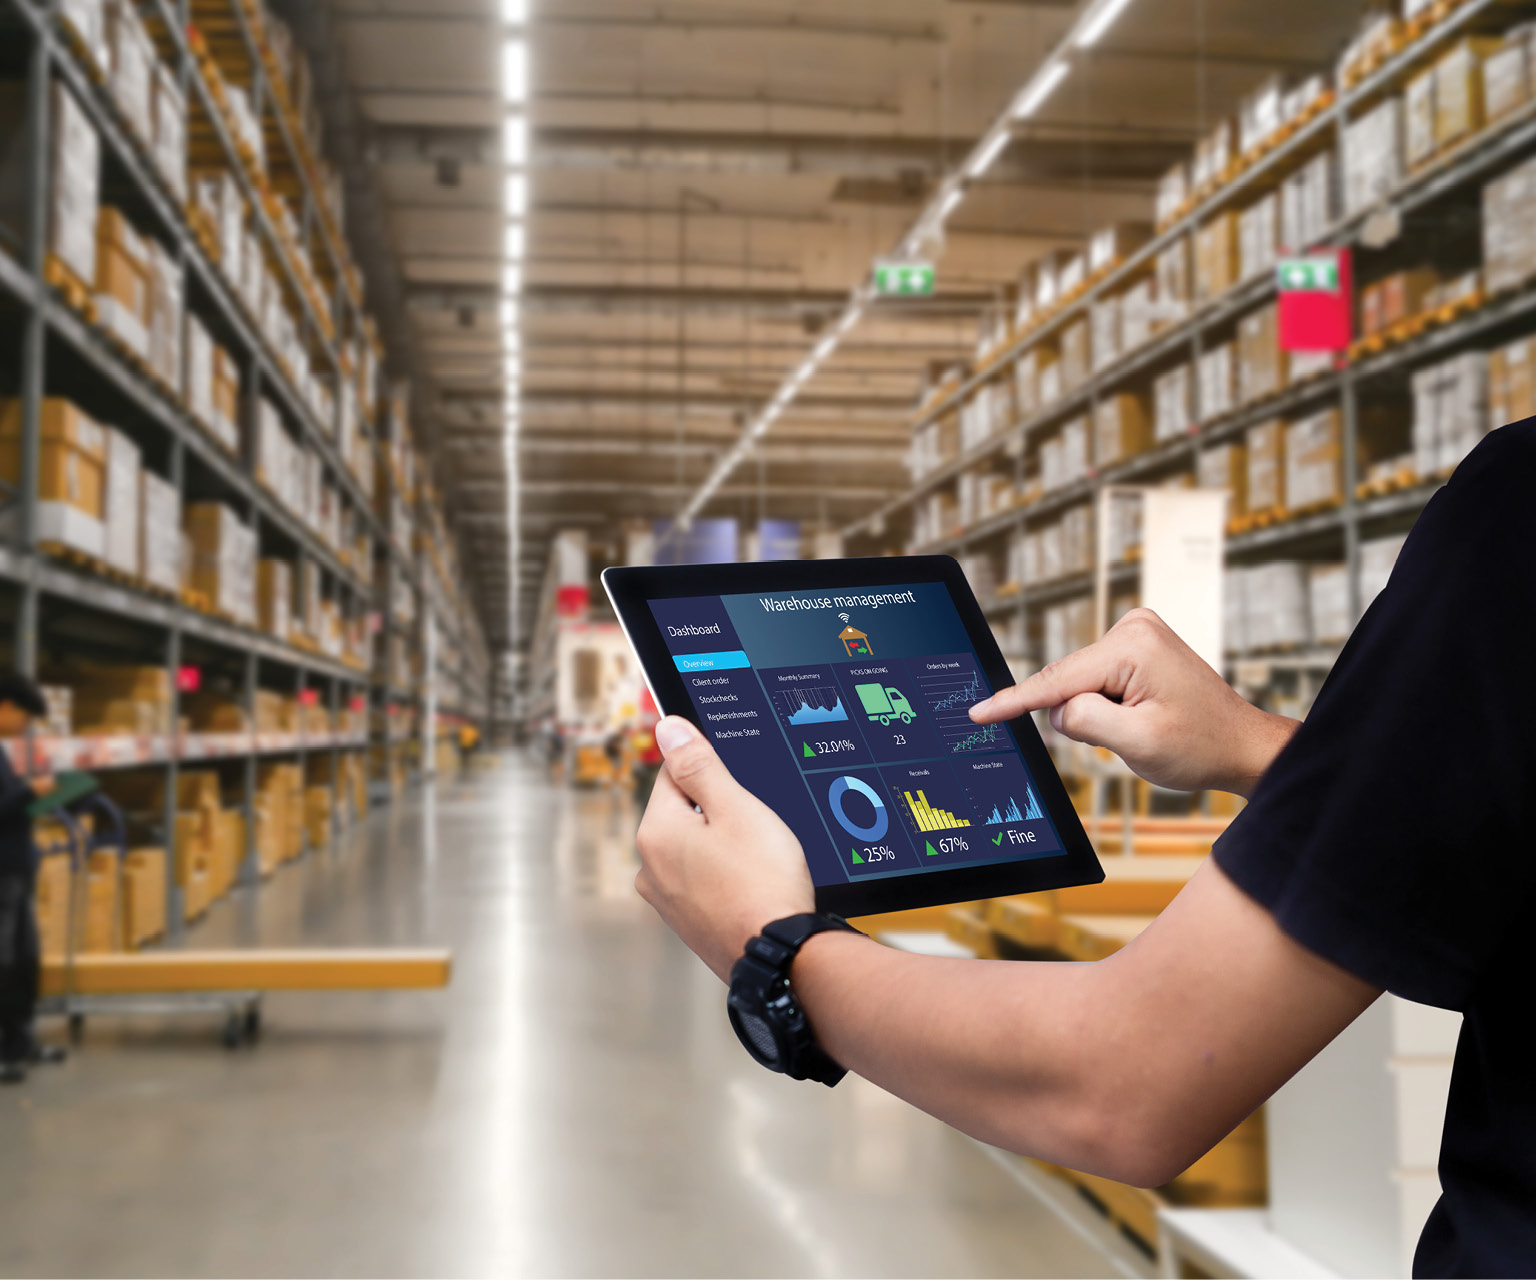 Man holding tablet managing Inventory in a warehouse using Mobile Trunk Stock.